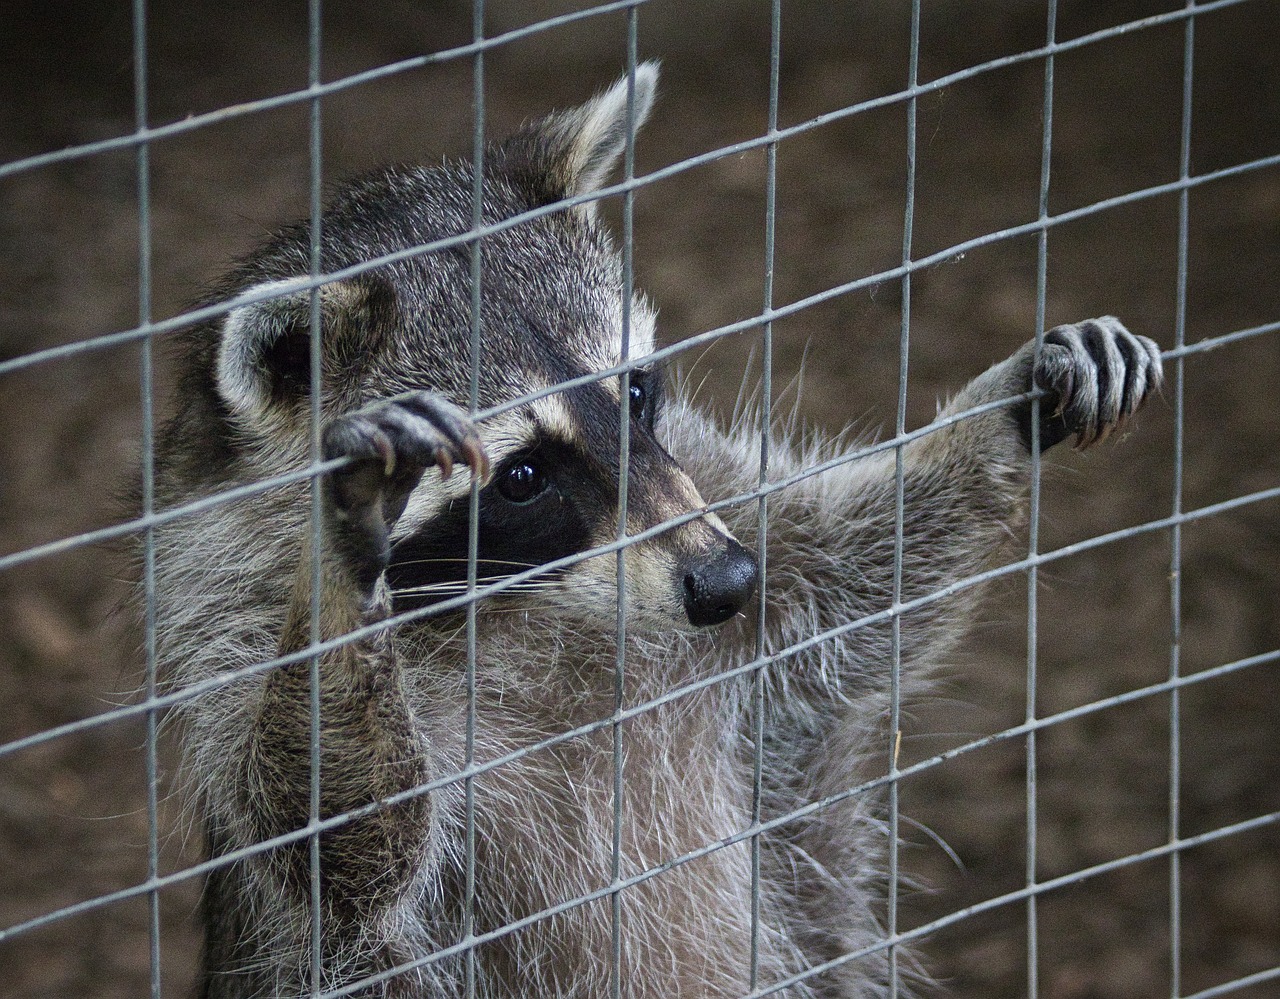 How Far Should You Relocate a Raccoon?